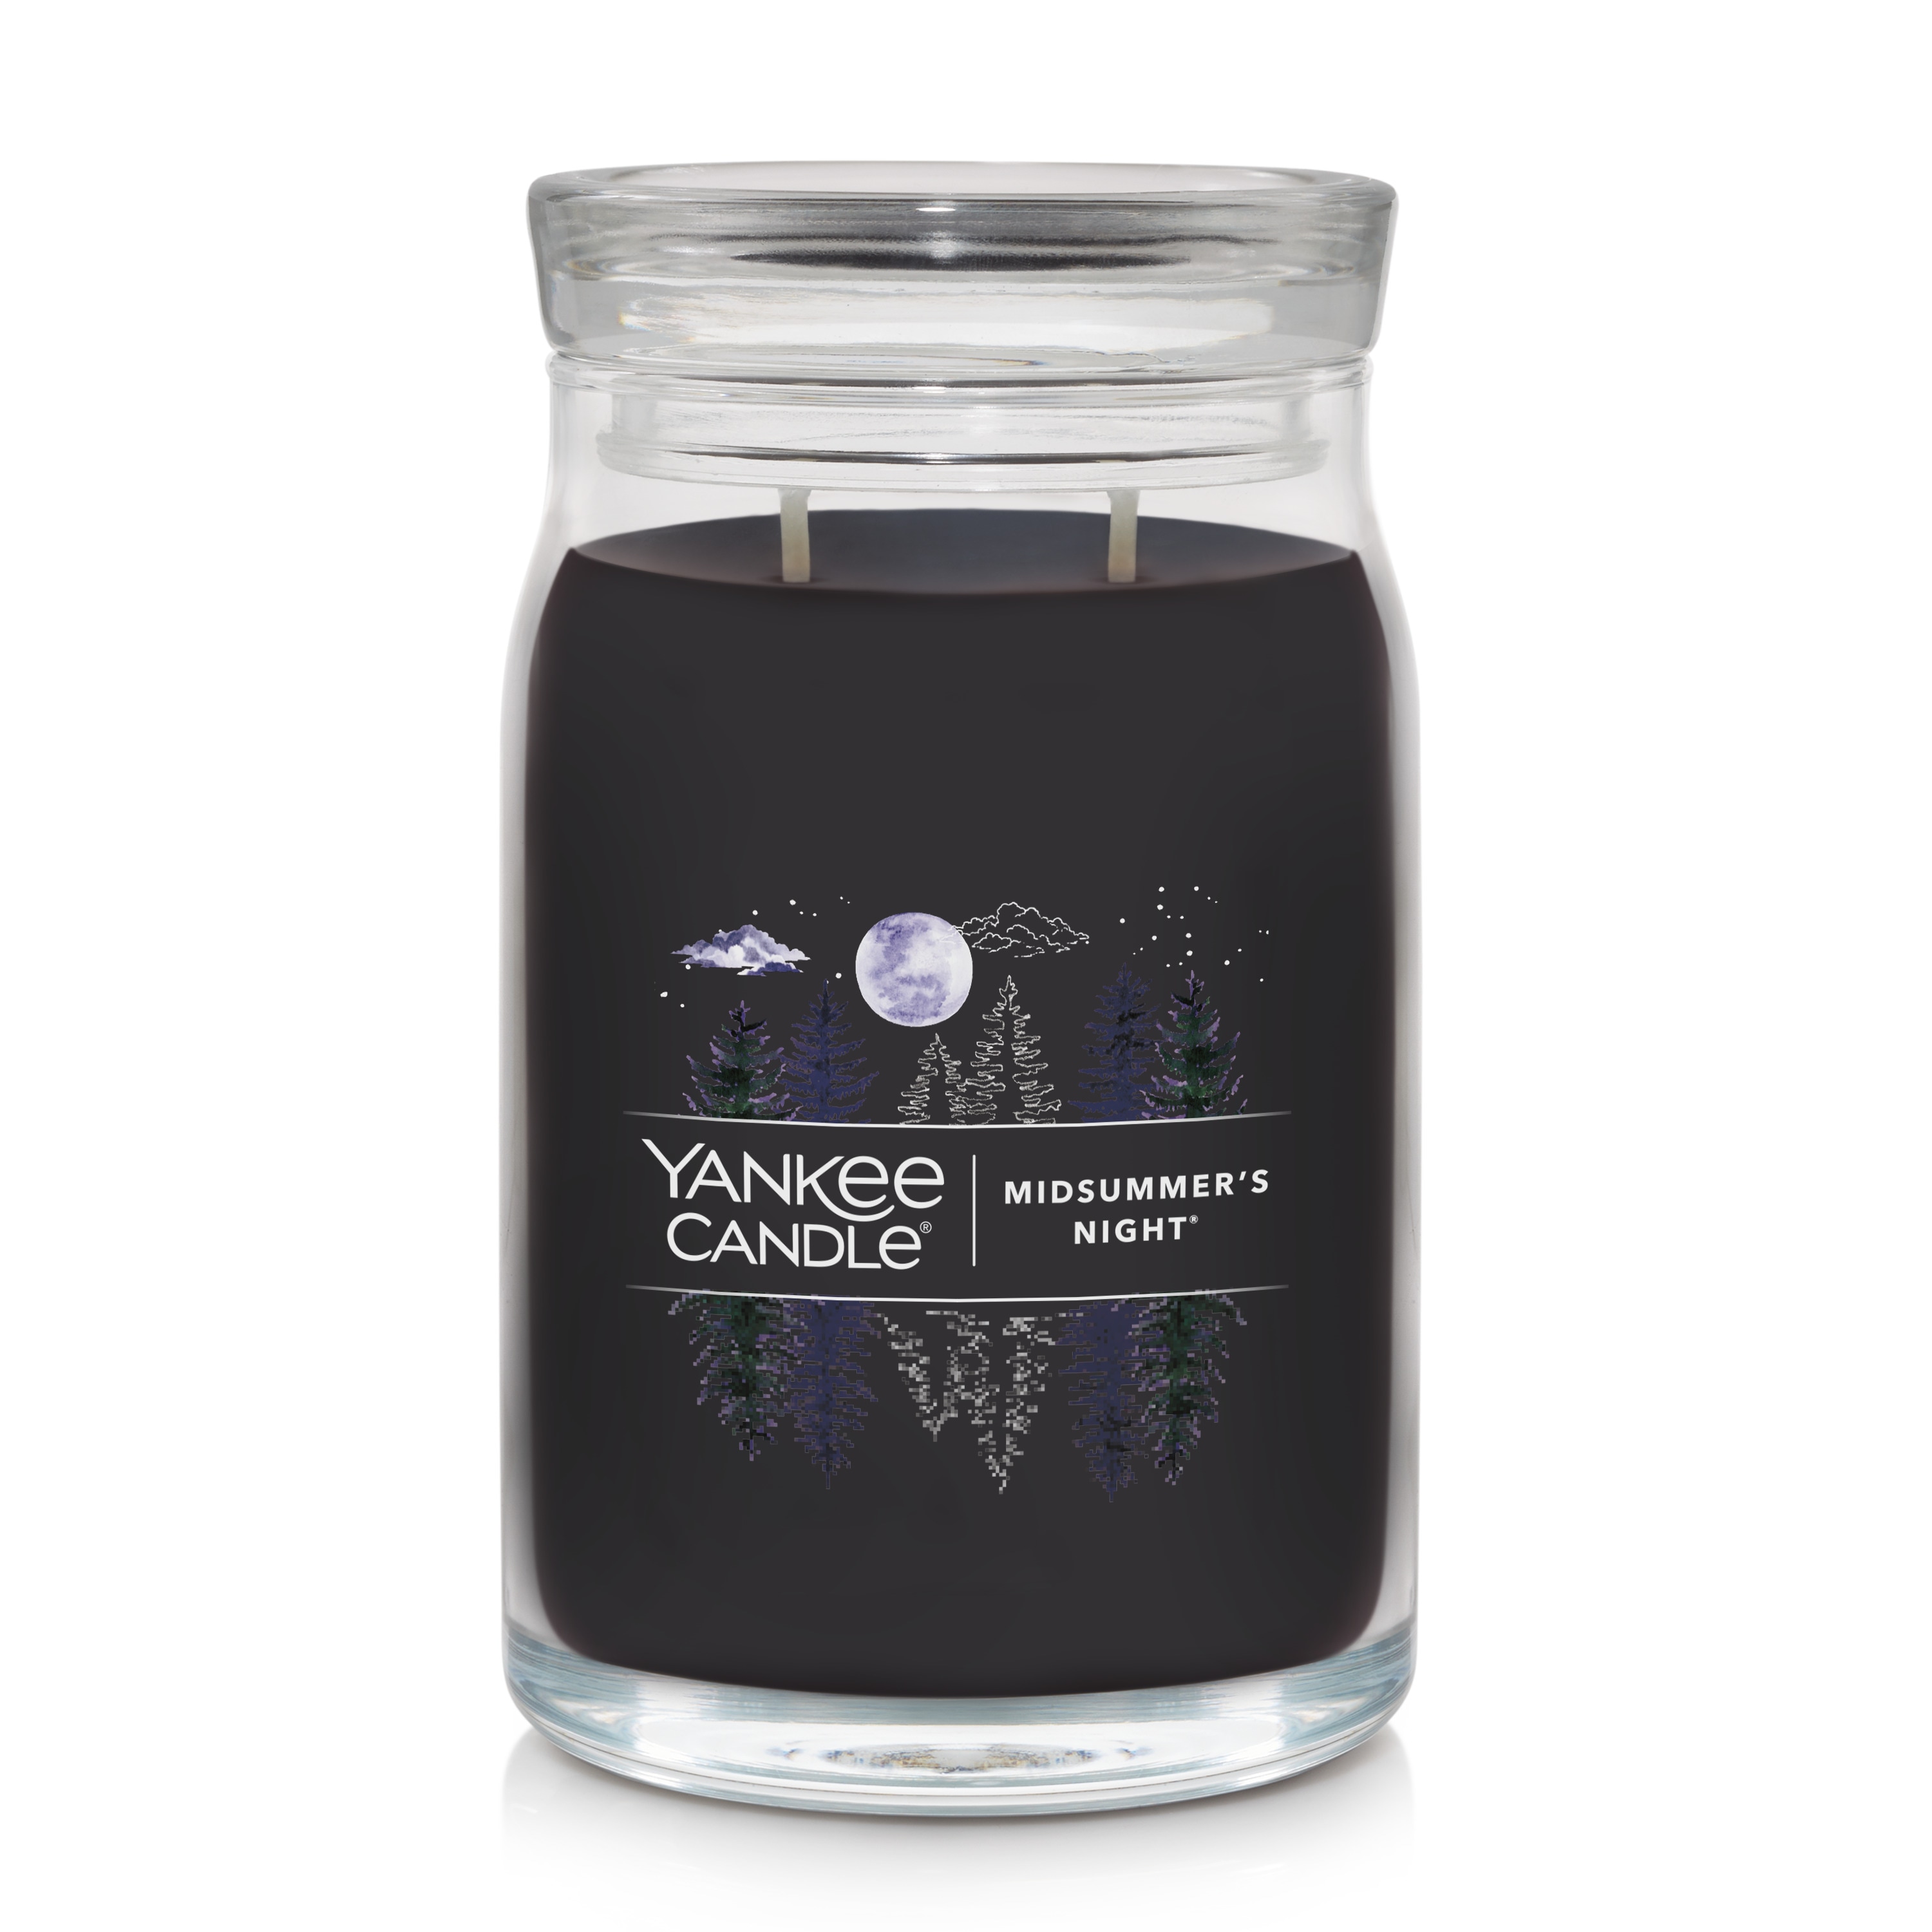  Yankee Candle Midsummer's Night Wax Melts, 3 Packs of 6 (18  Total) : Home & Kitchen